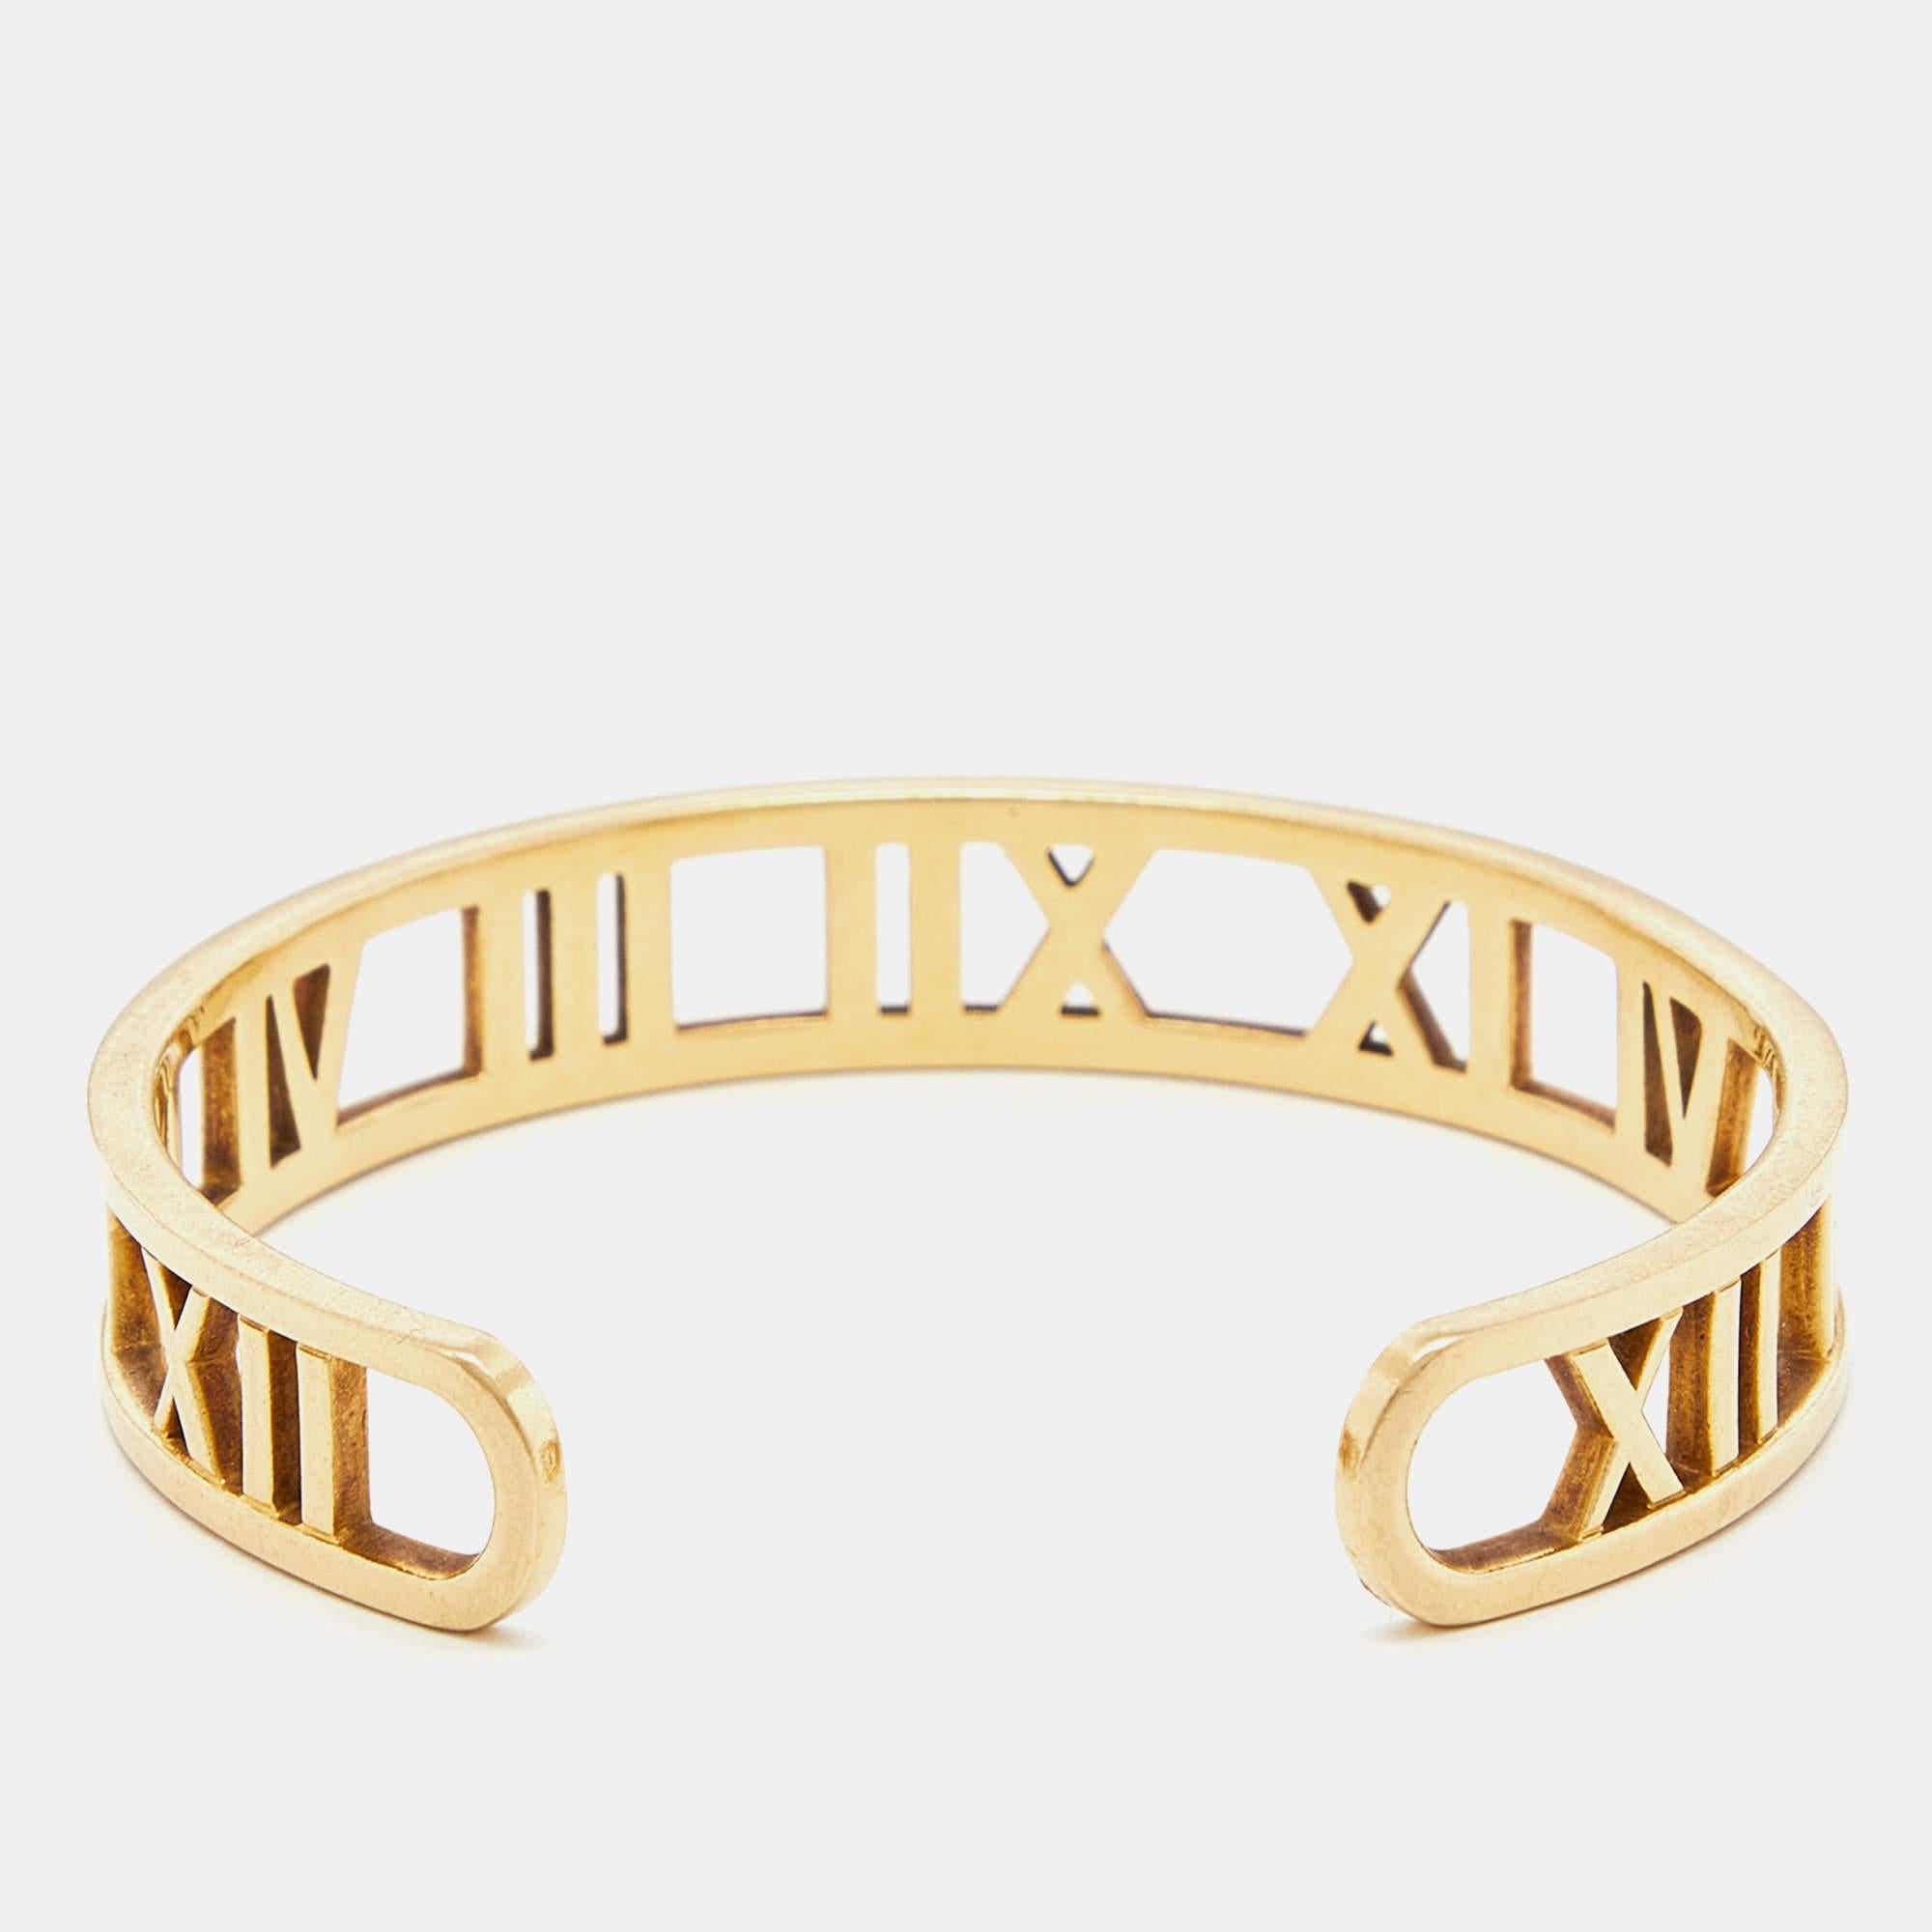 This 28k yellow gold open cuff bracelet from Tiffany & Co. is from their Atlas line. The cuff is sleek and sophisticated in its design. A linear arrangement of Roman numeral motifs is debossed across the bracelet to bring forth the allure of the